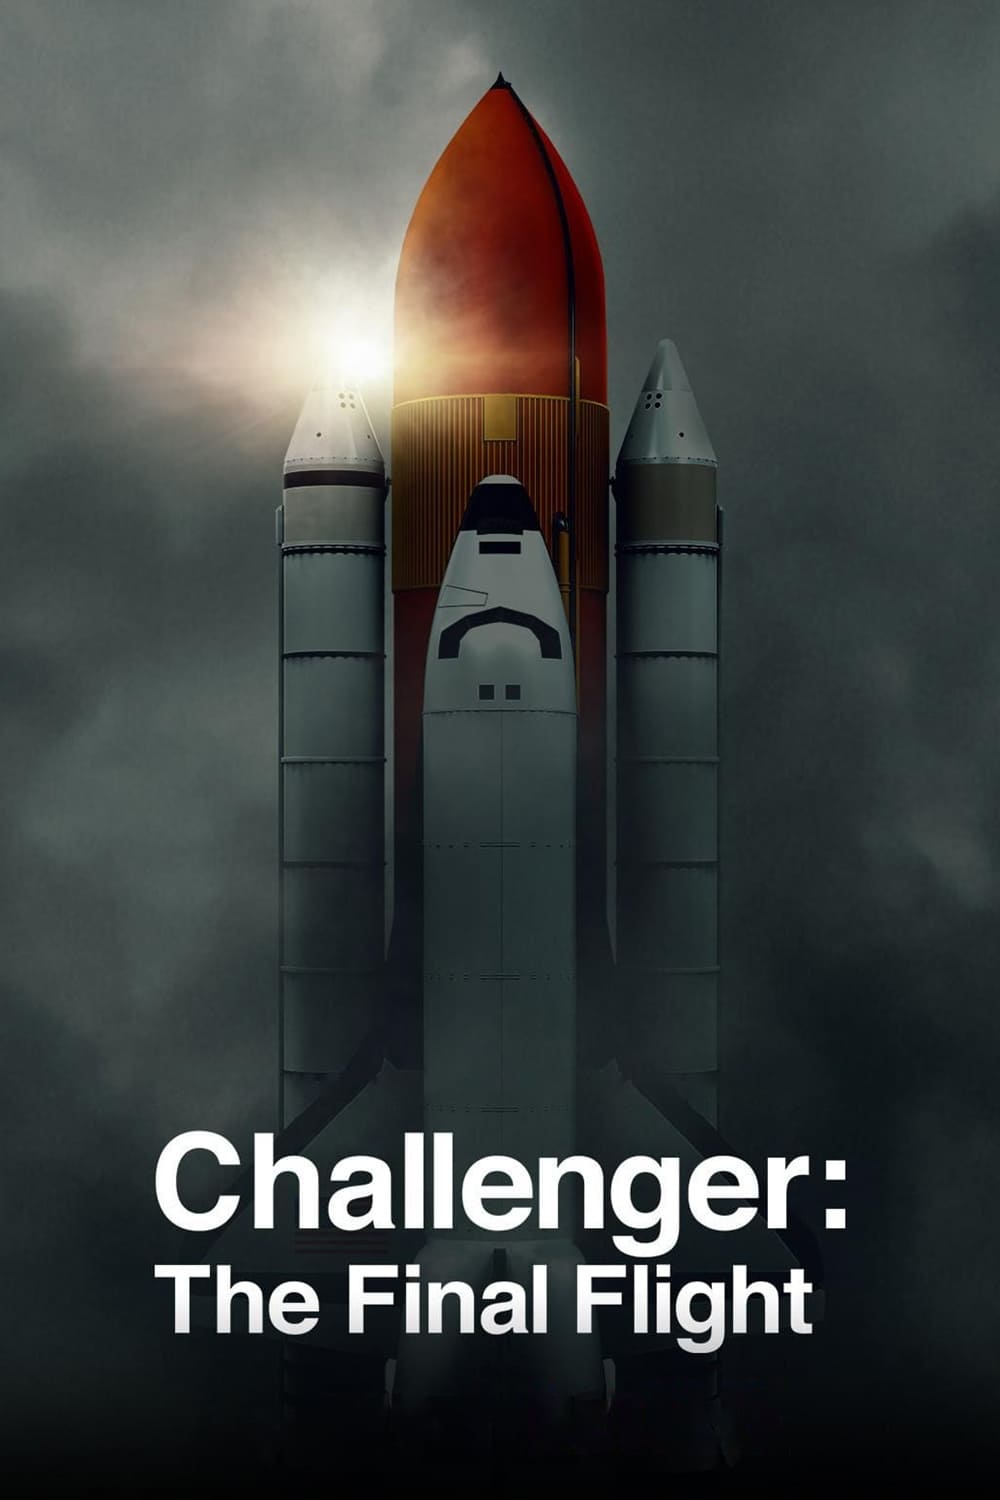 Challenger: The Final Flight TV Shows About Space